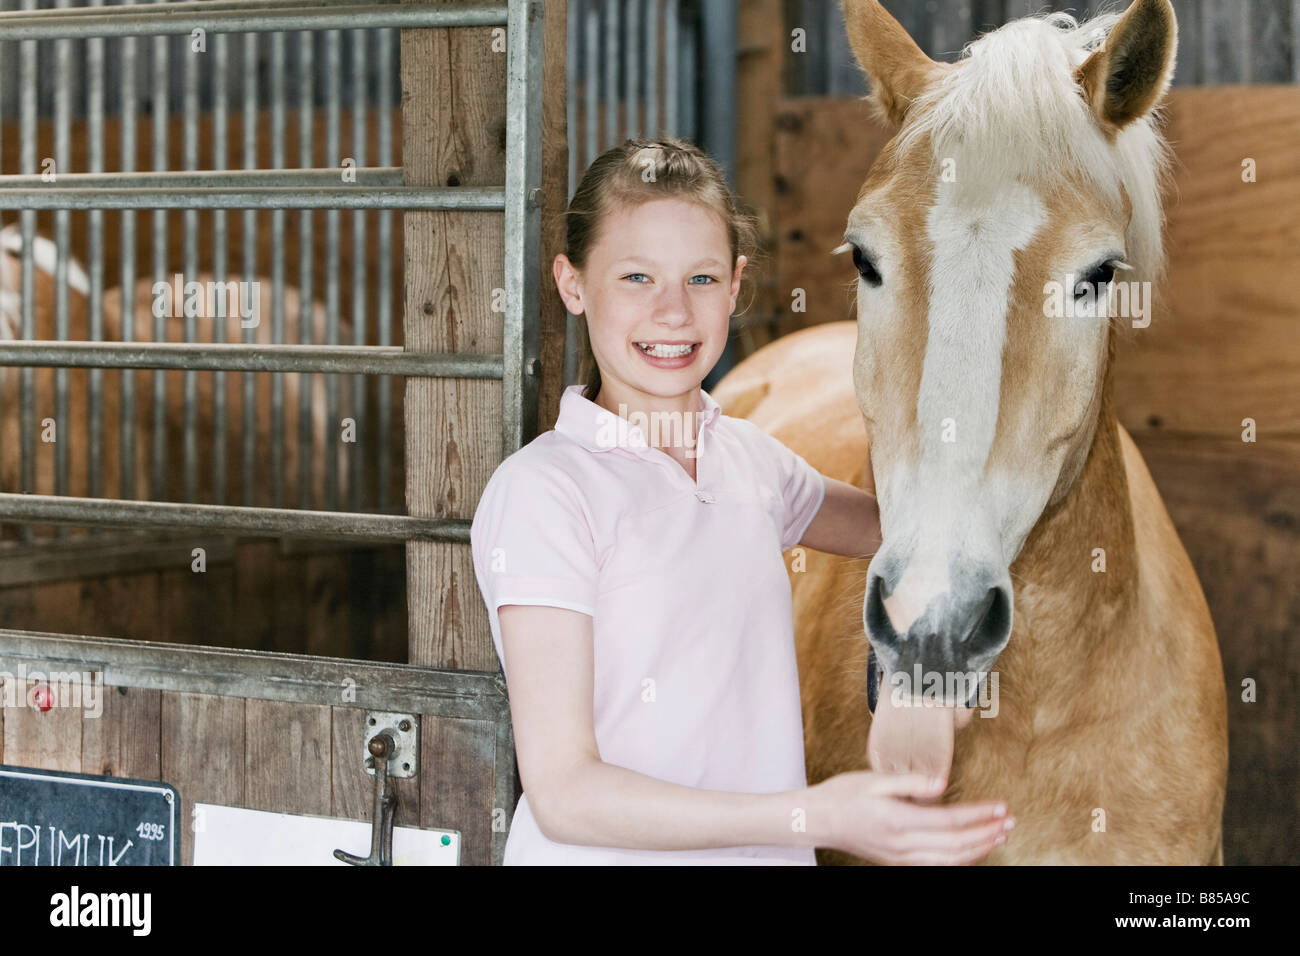 portrait of young girl with horse in stable Stock Photo